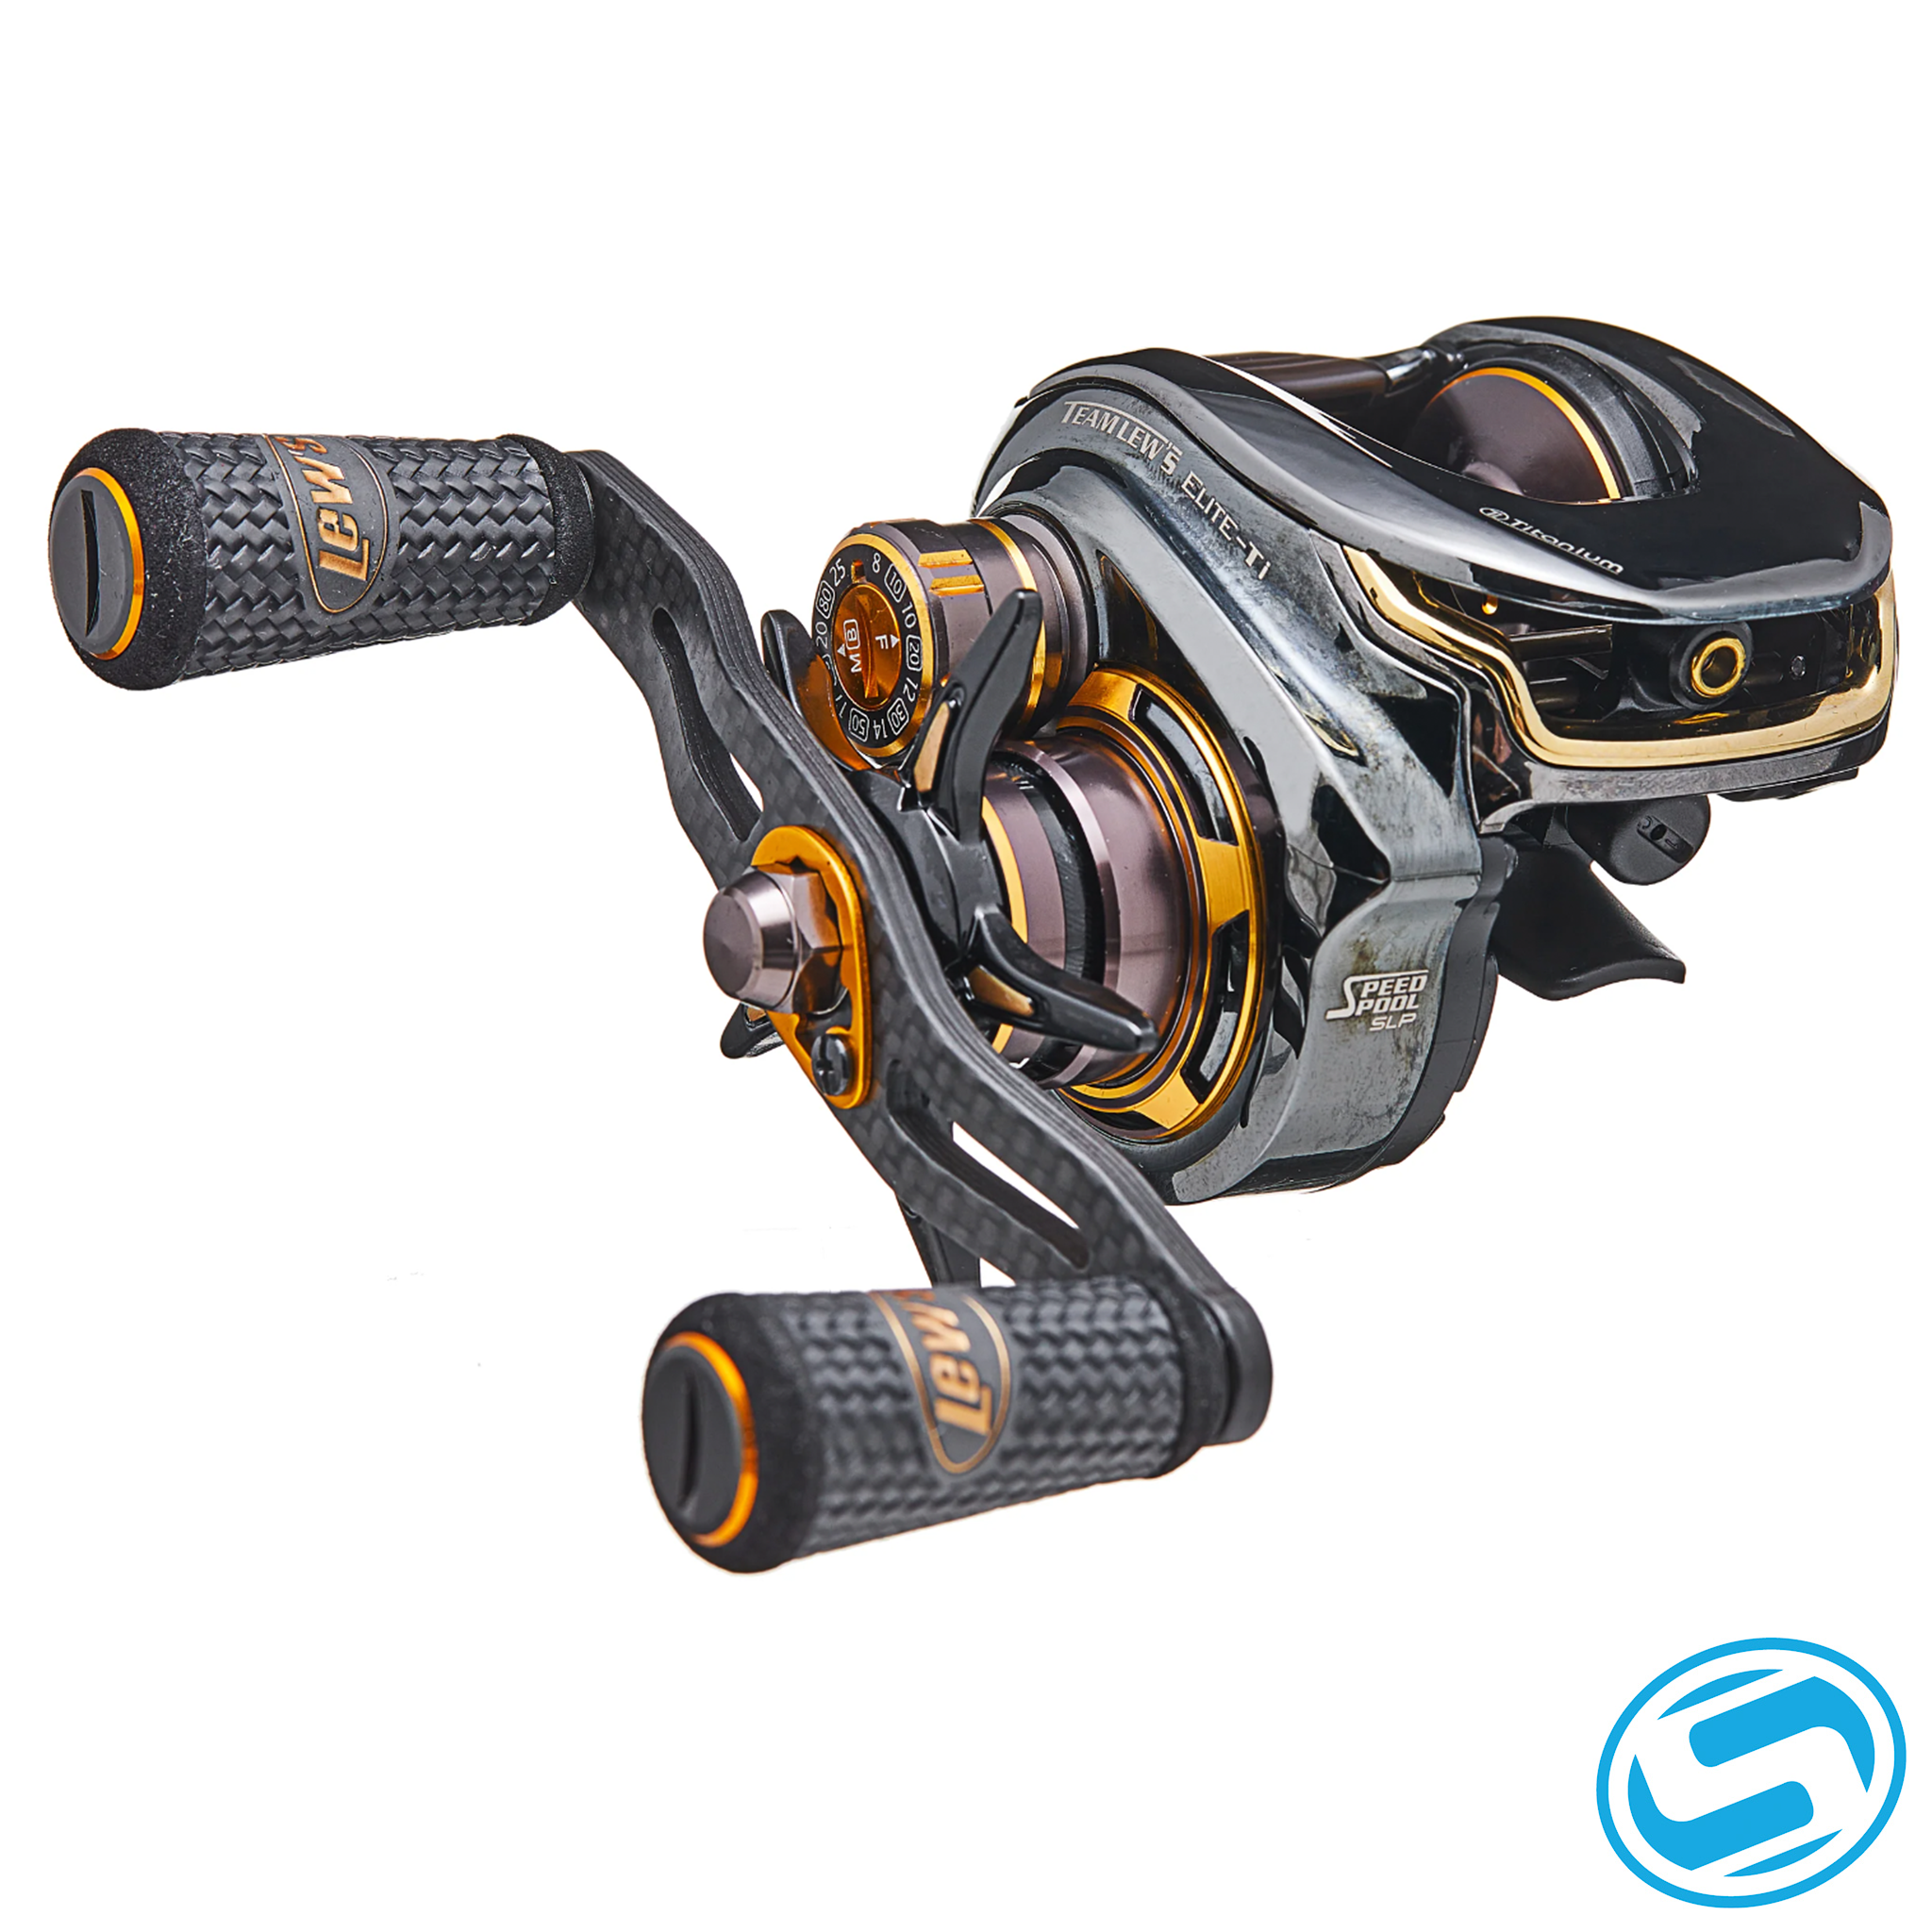 Team Lew's HyperMag Casting Reel Right / 7.5:1